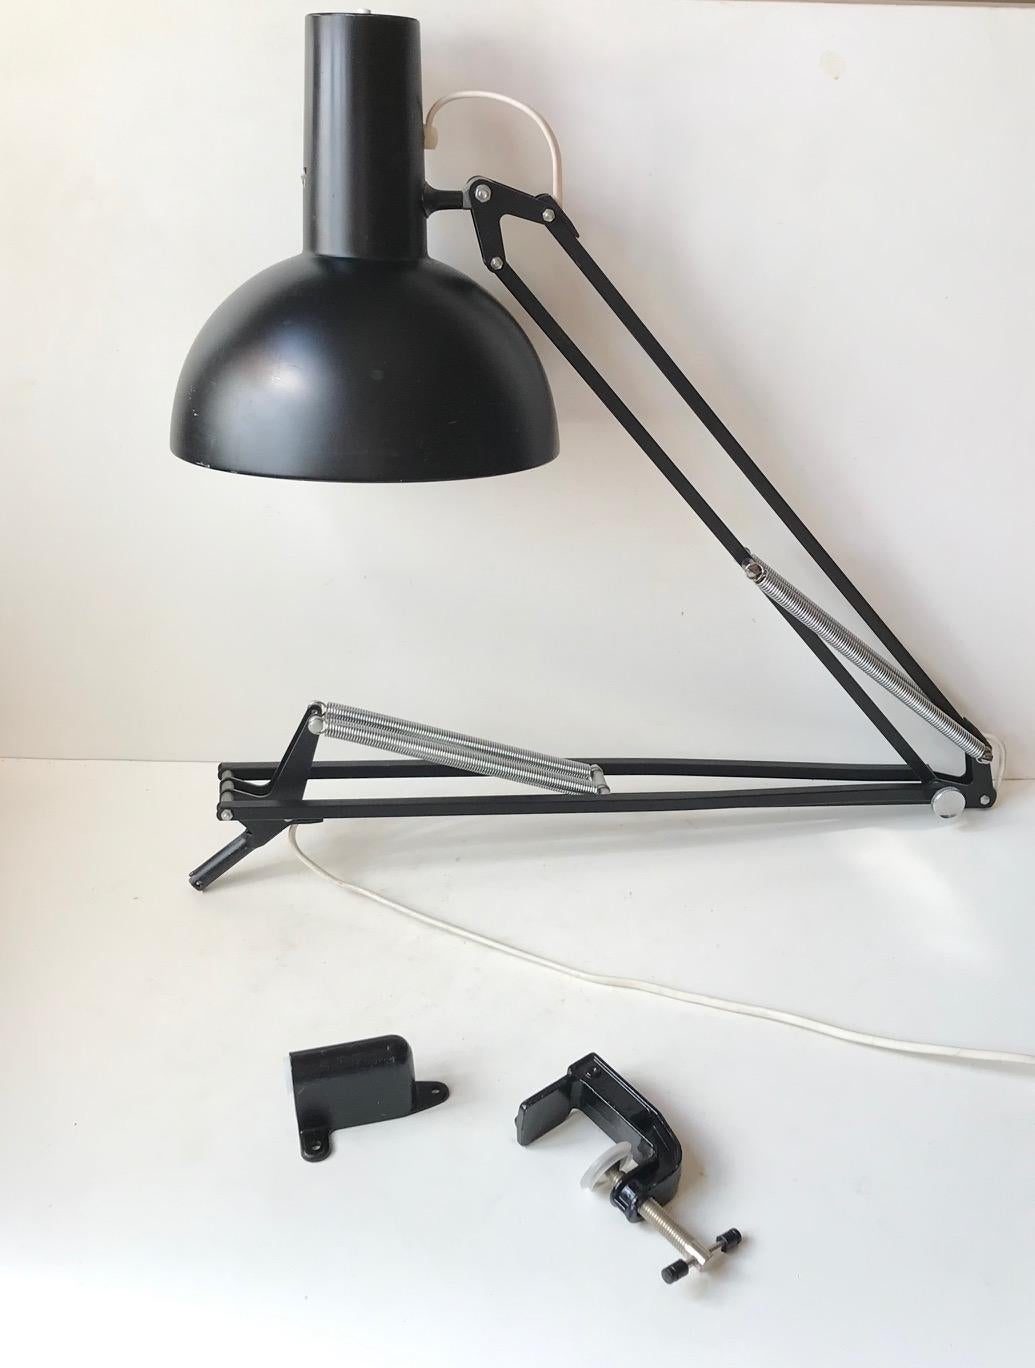 Often referred to as 'The Ghost of PH' and based on the Ideas of Poul Henningsen this fully adjustable black 'Anglepoise' desk or wall light was designed in-house at Louis Poulsen in the early 1970s. It comes with LP stickers and original porcelain